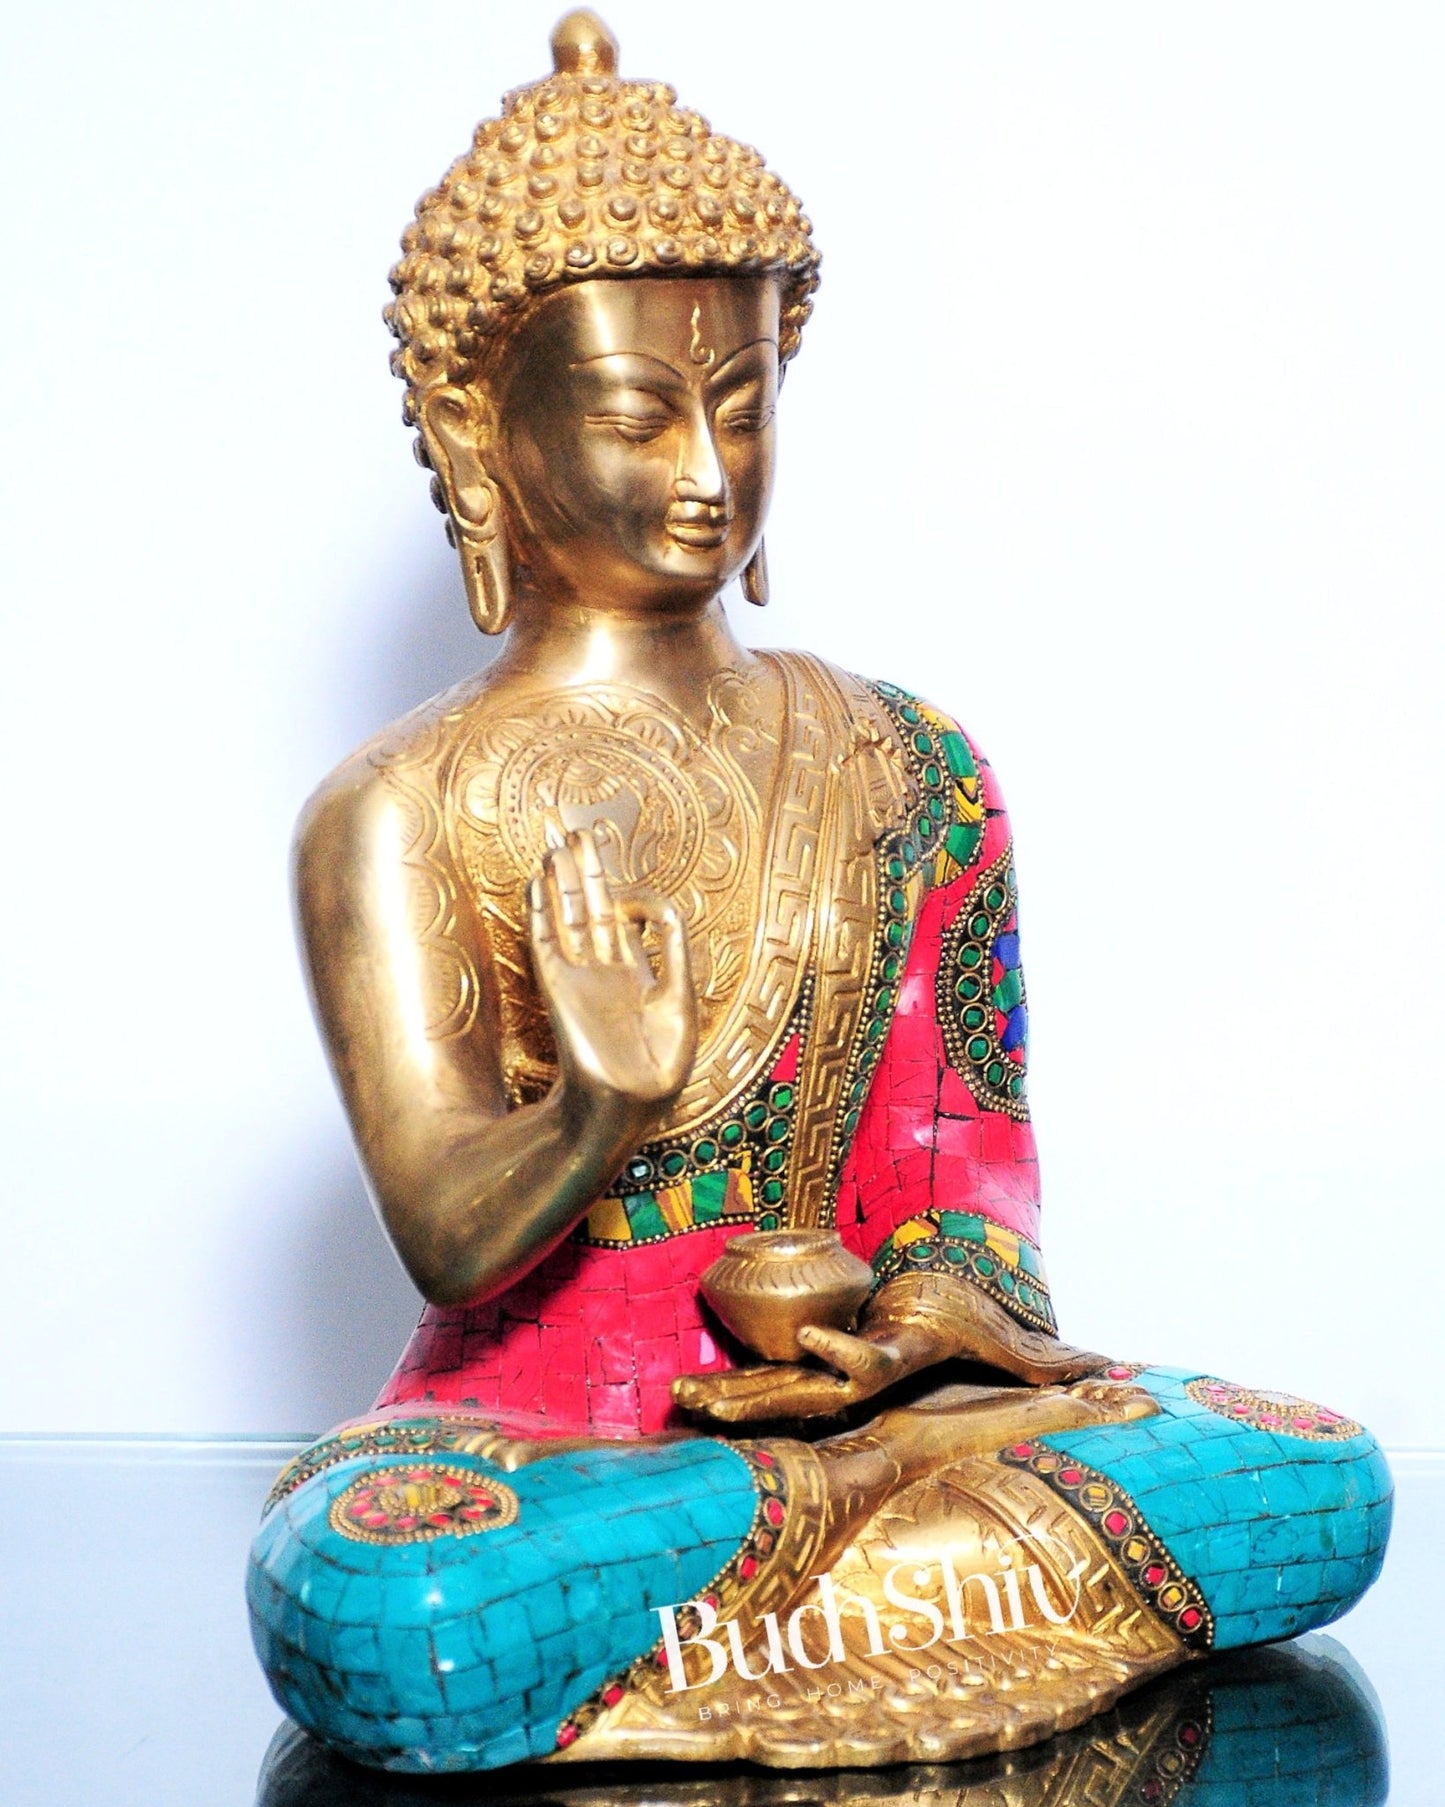 Pure Brass Blessing Buddha Statue | Handcrafted with Natural Stone 12 inches - Budhshiv.com